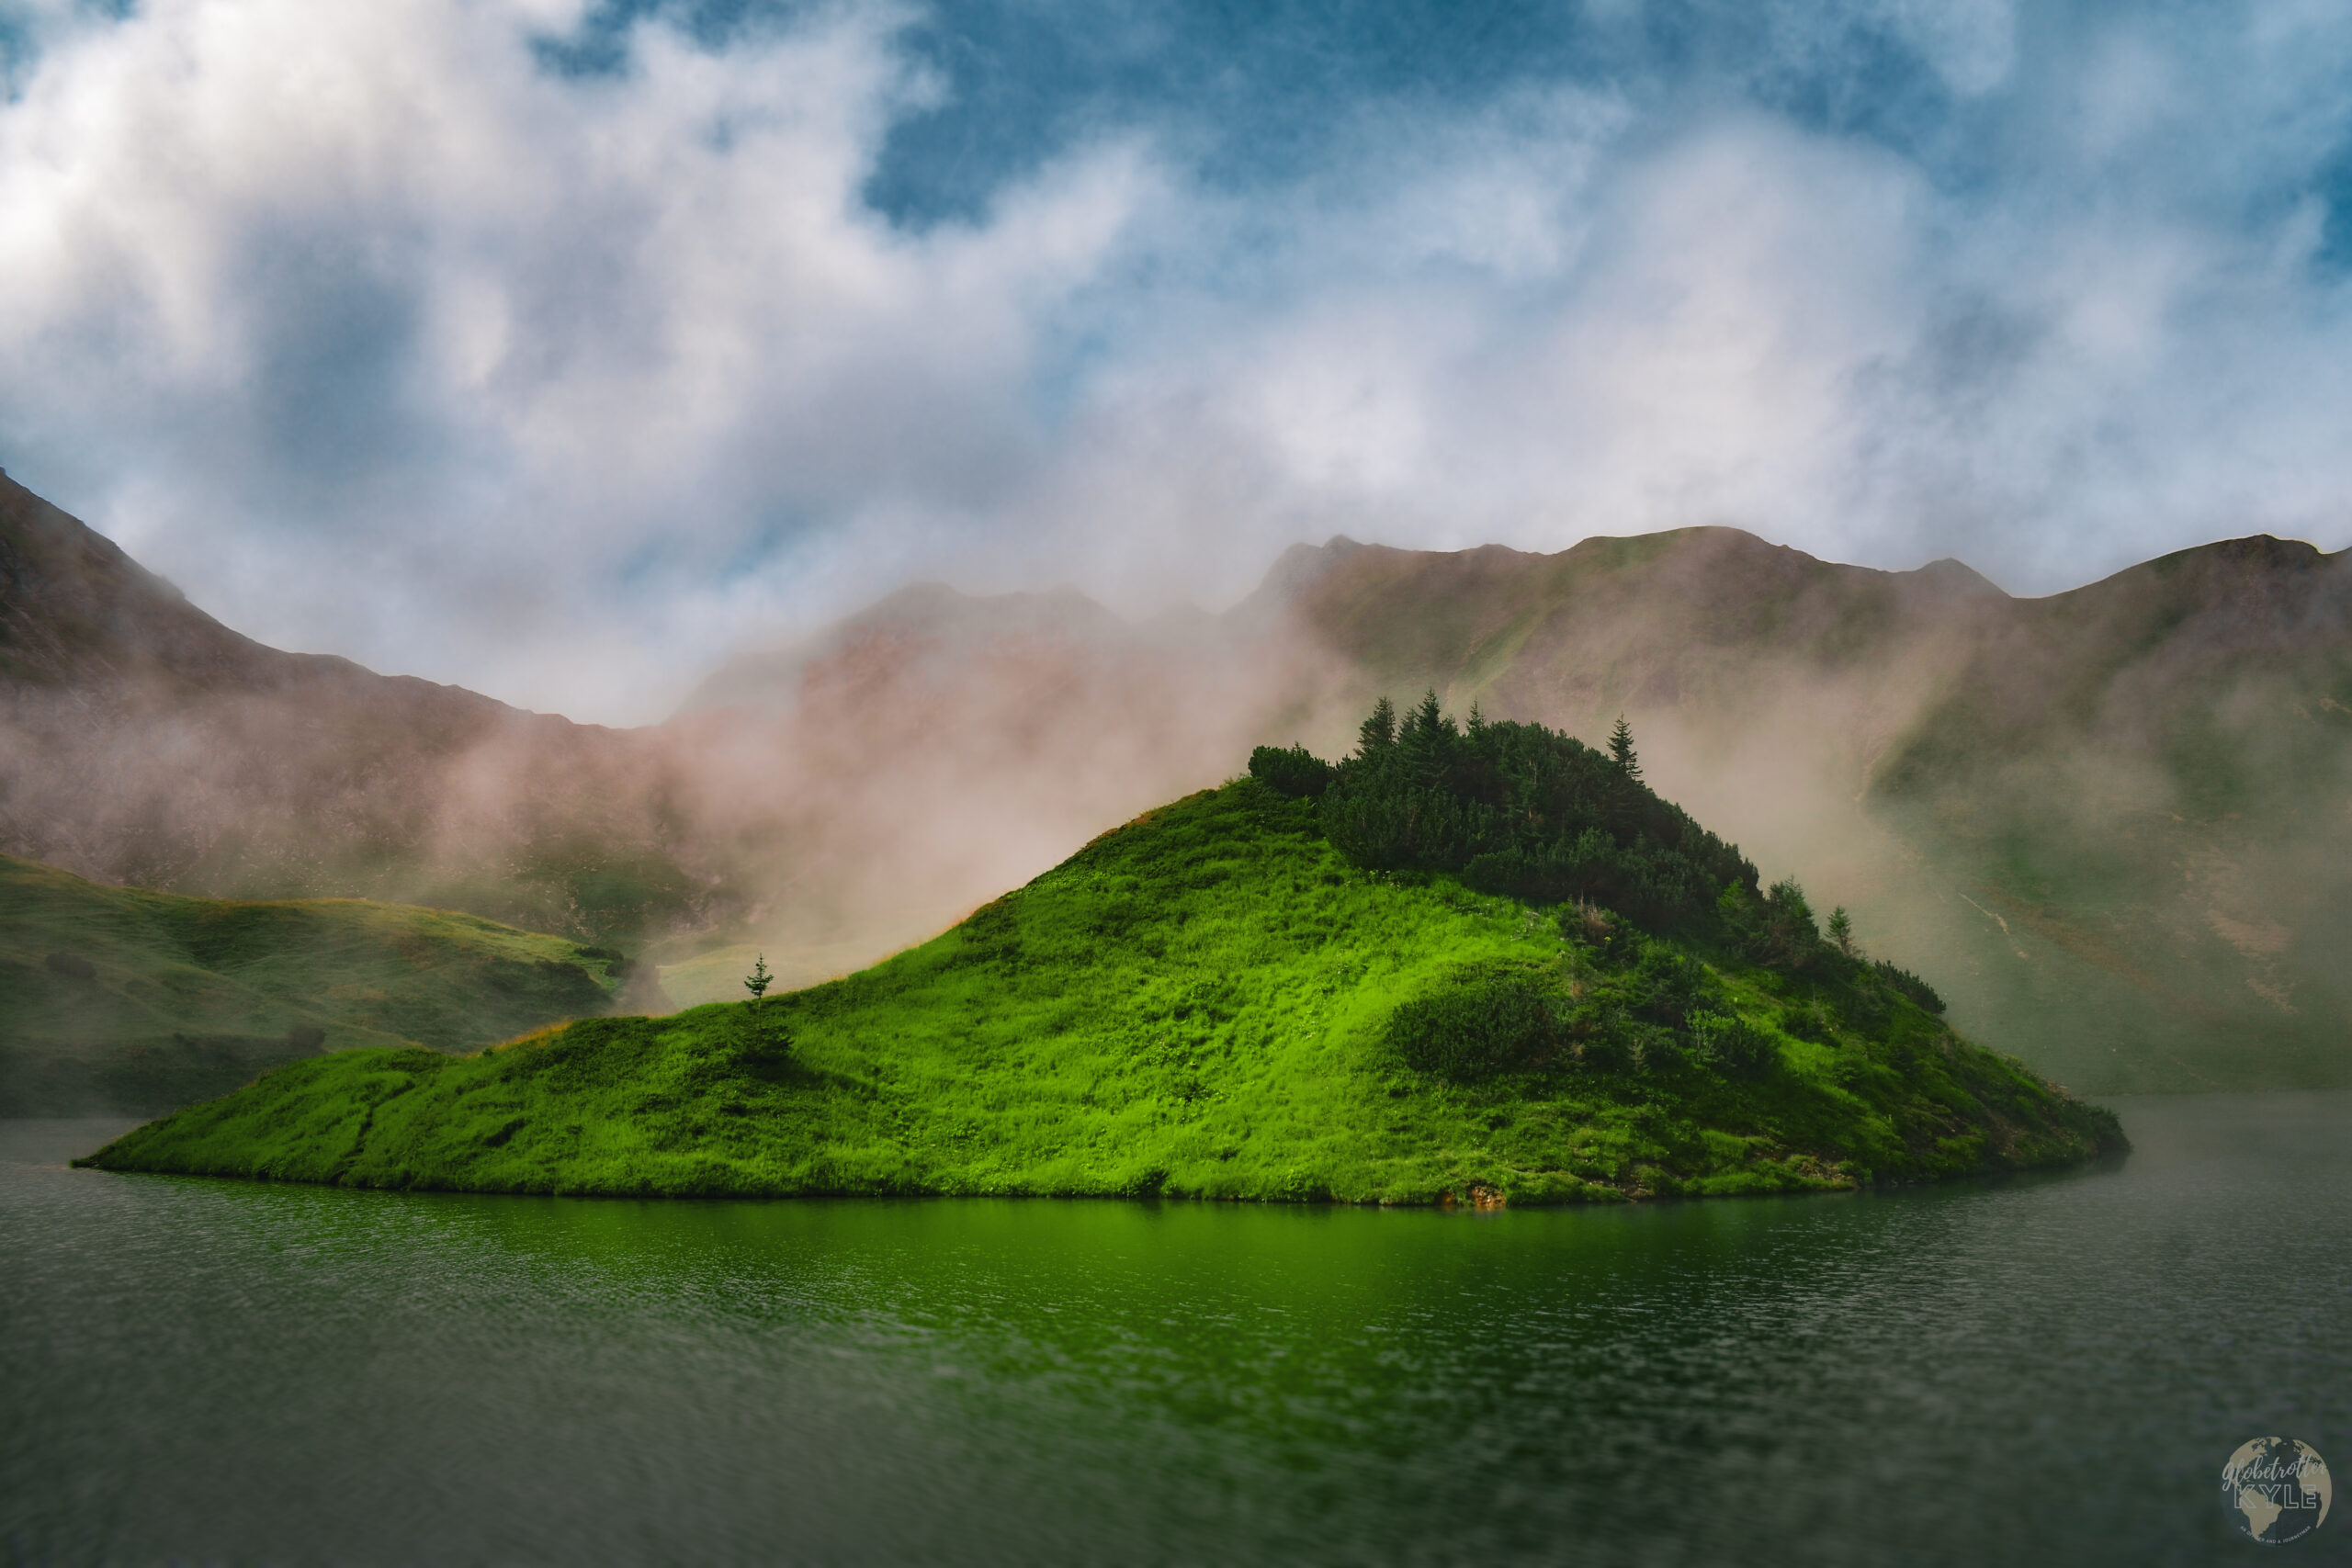 a green island surrounded by water with a mountain range behind it found by hiking in germany